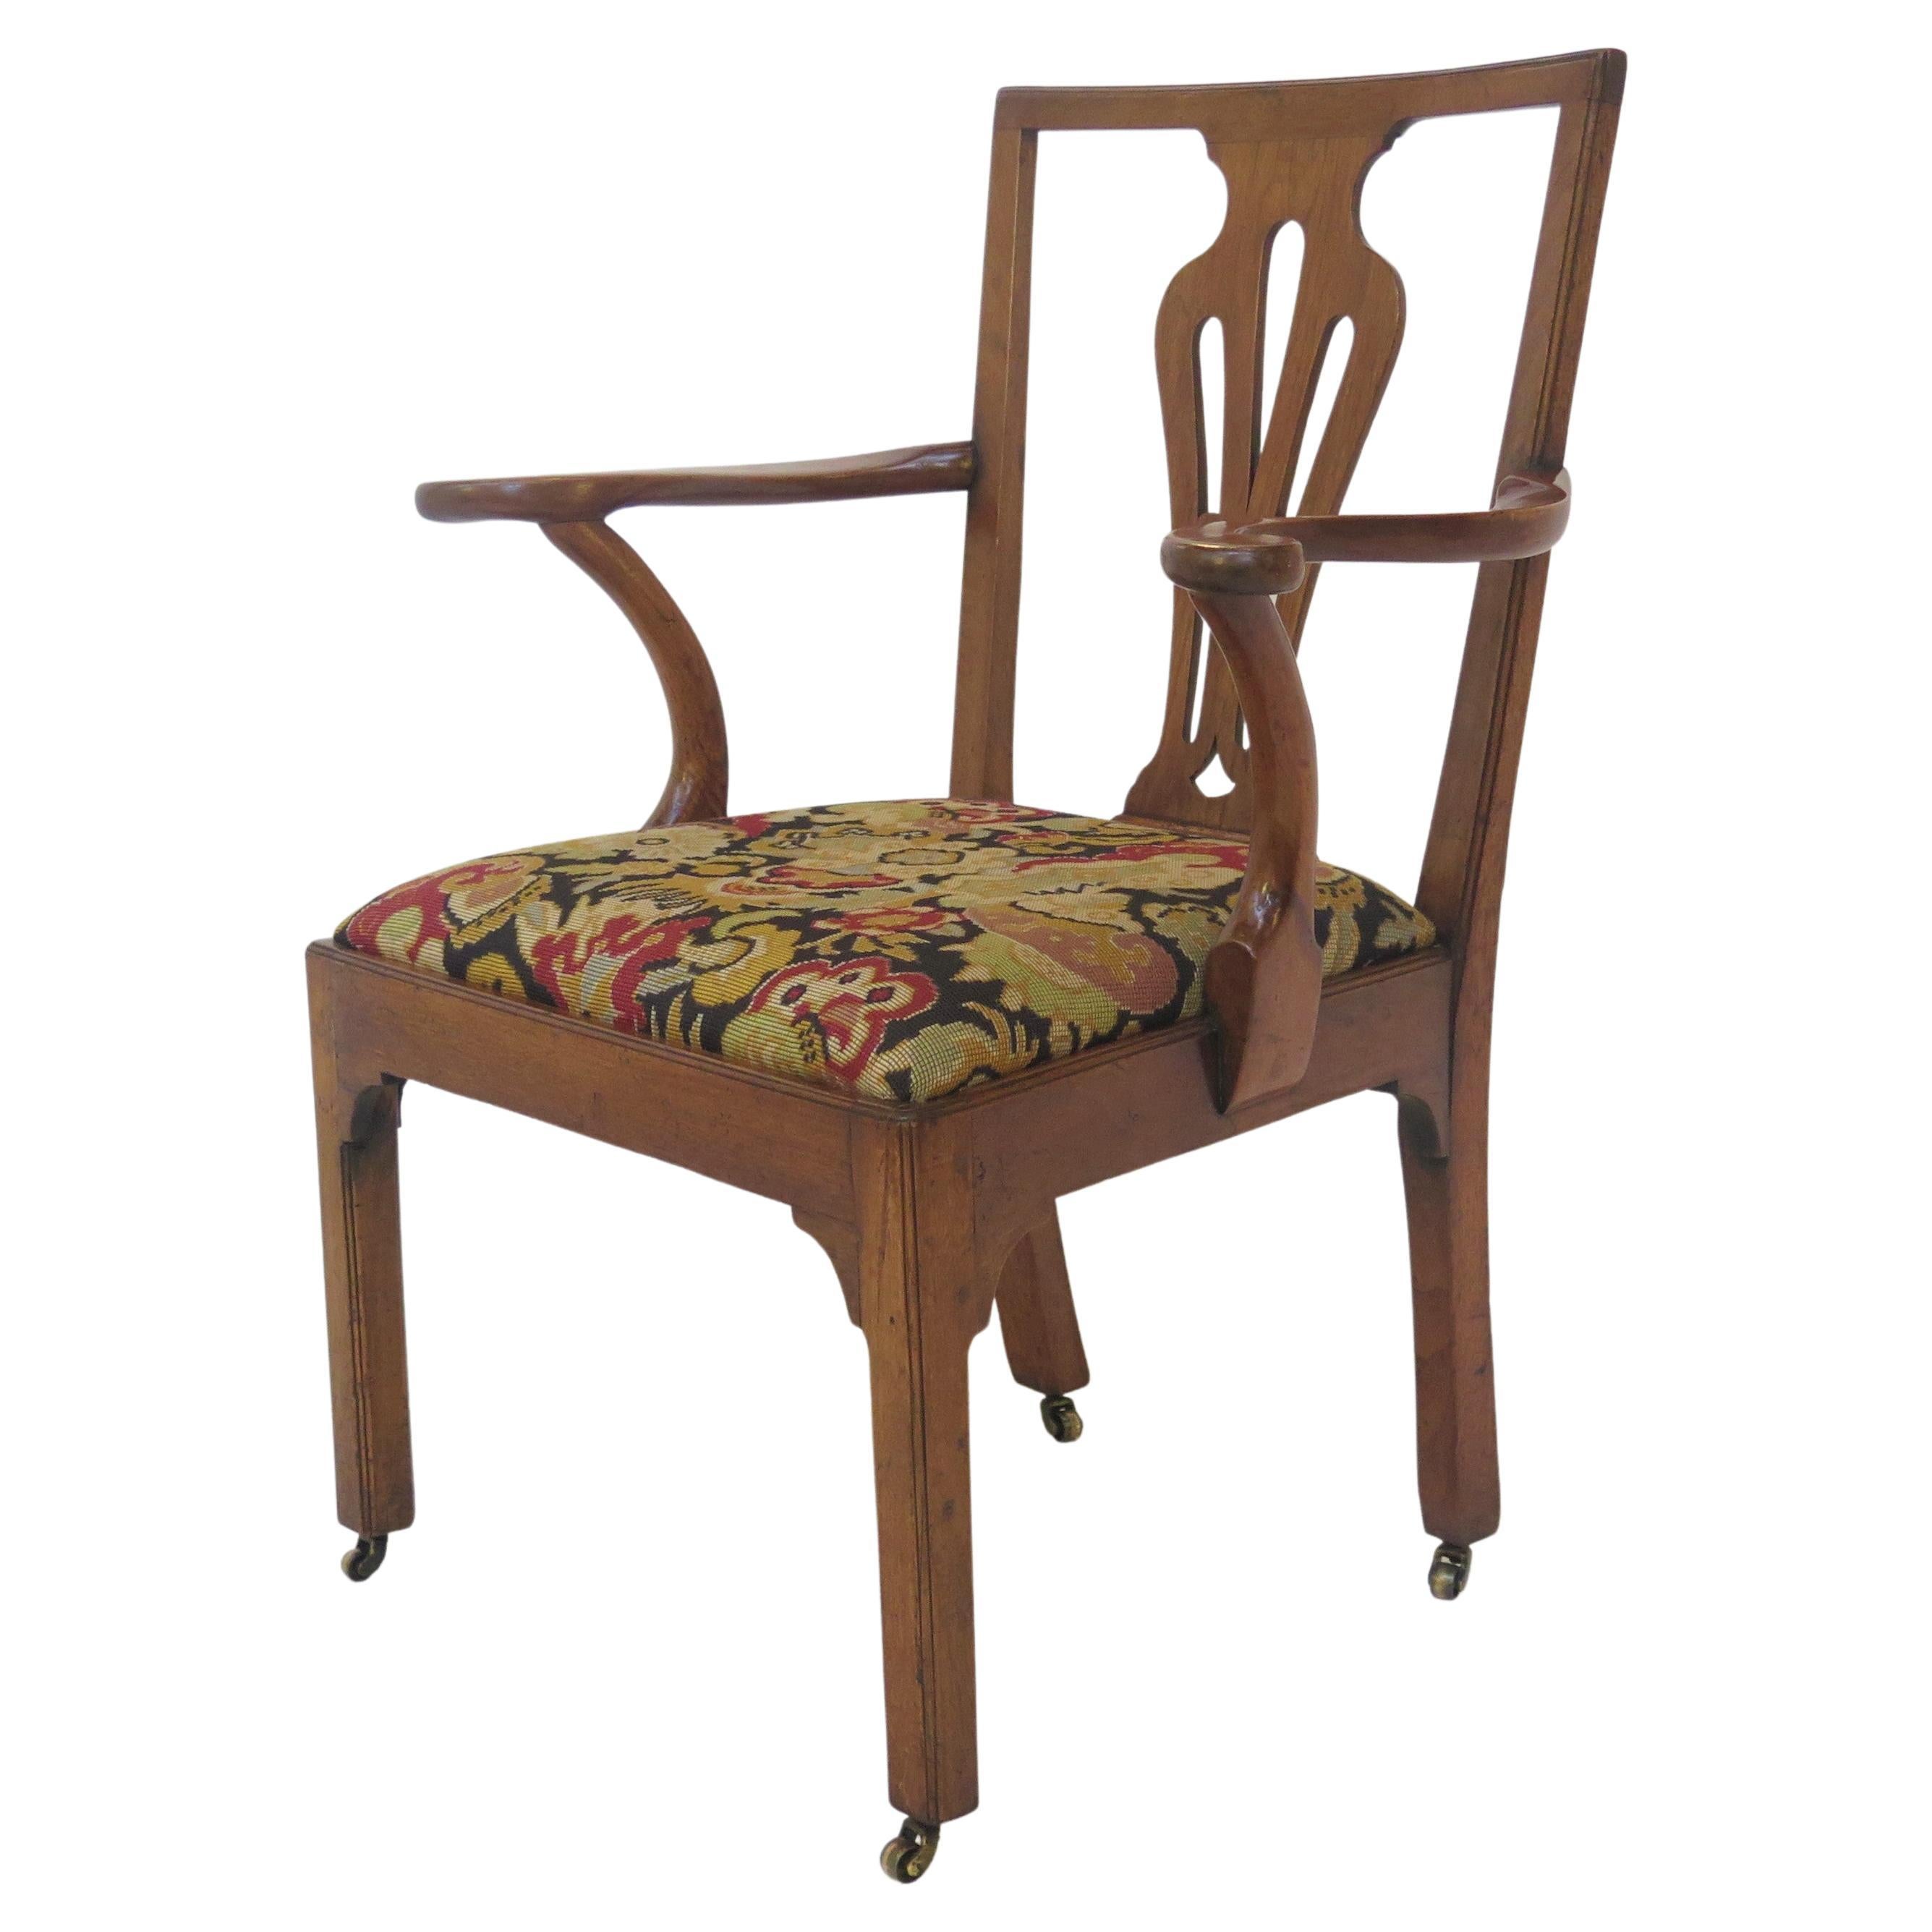 Handsome Georgian Armchair / Desk Chair of Walnut with Needlework Seat For Sale